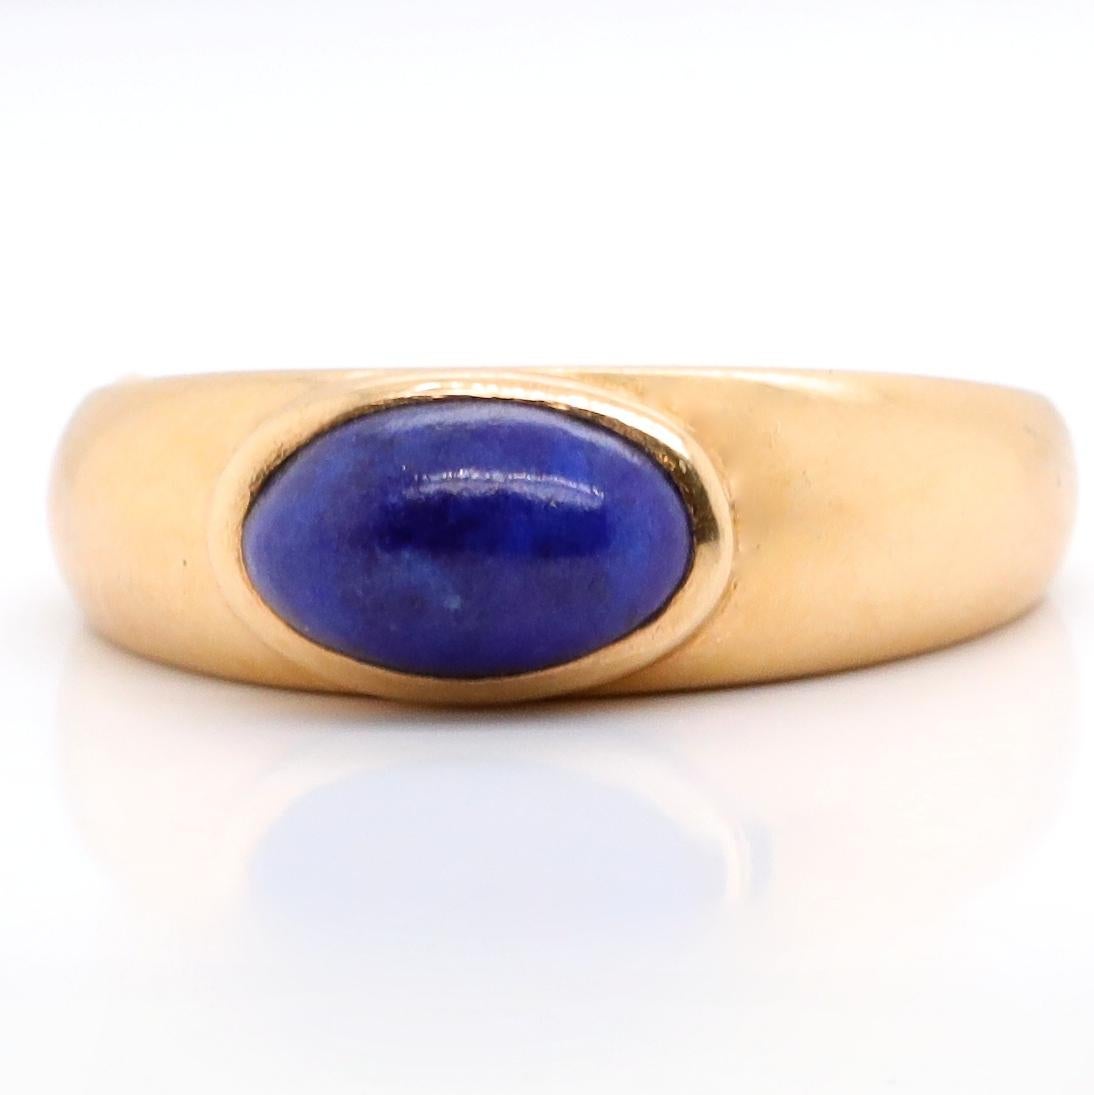 Fun and colorful, these rings will brighten your day and add some color to your look. Stack them together or wear separately with jeans and a top for bright accent, or with an eventing dress to complete your look. Cabochon cut lapis lazuli and